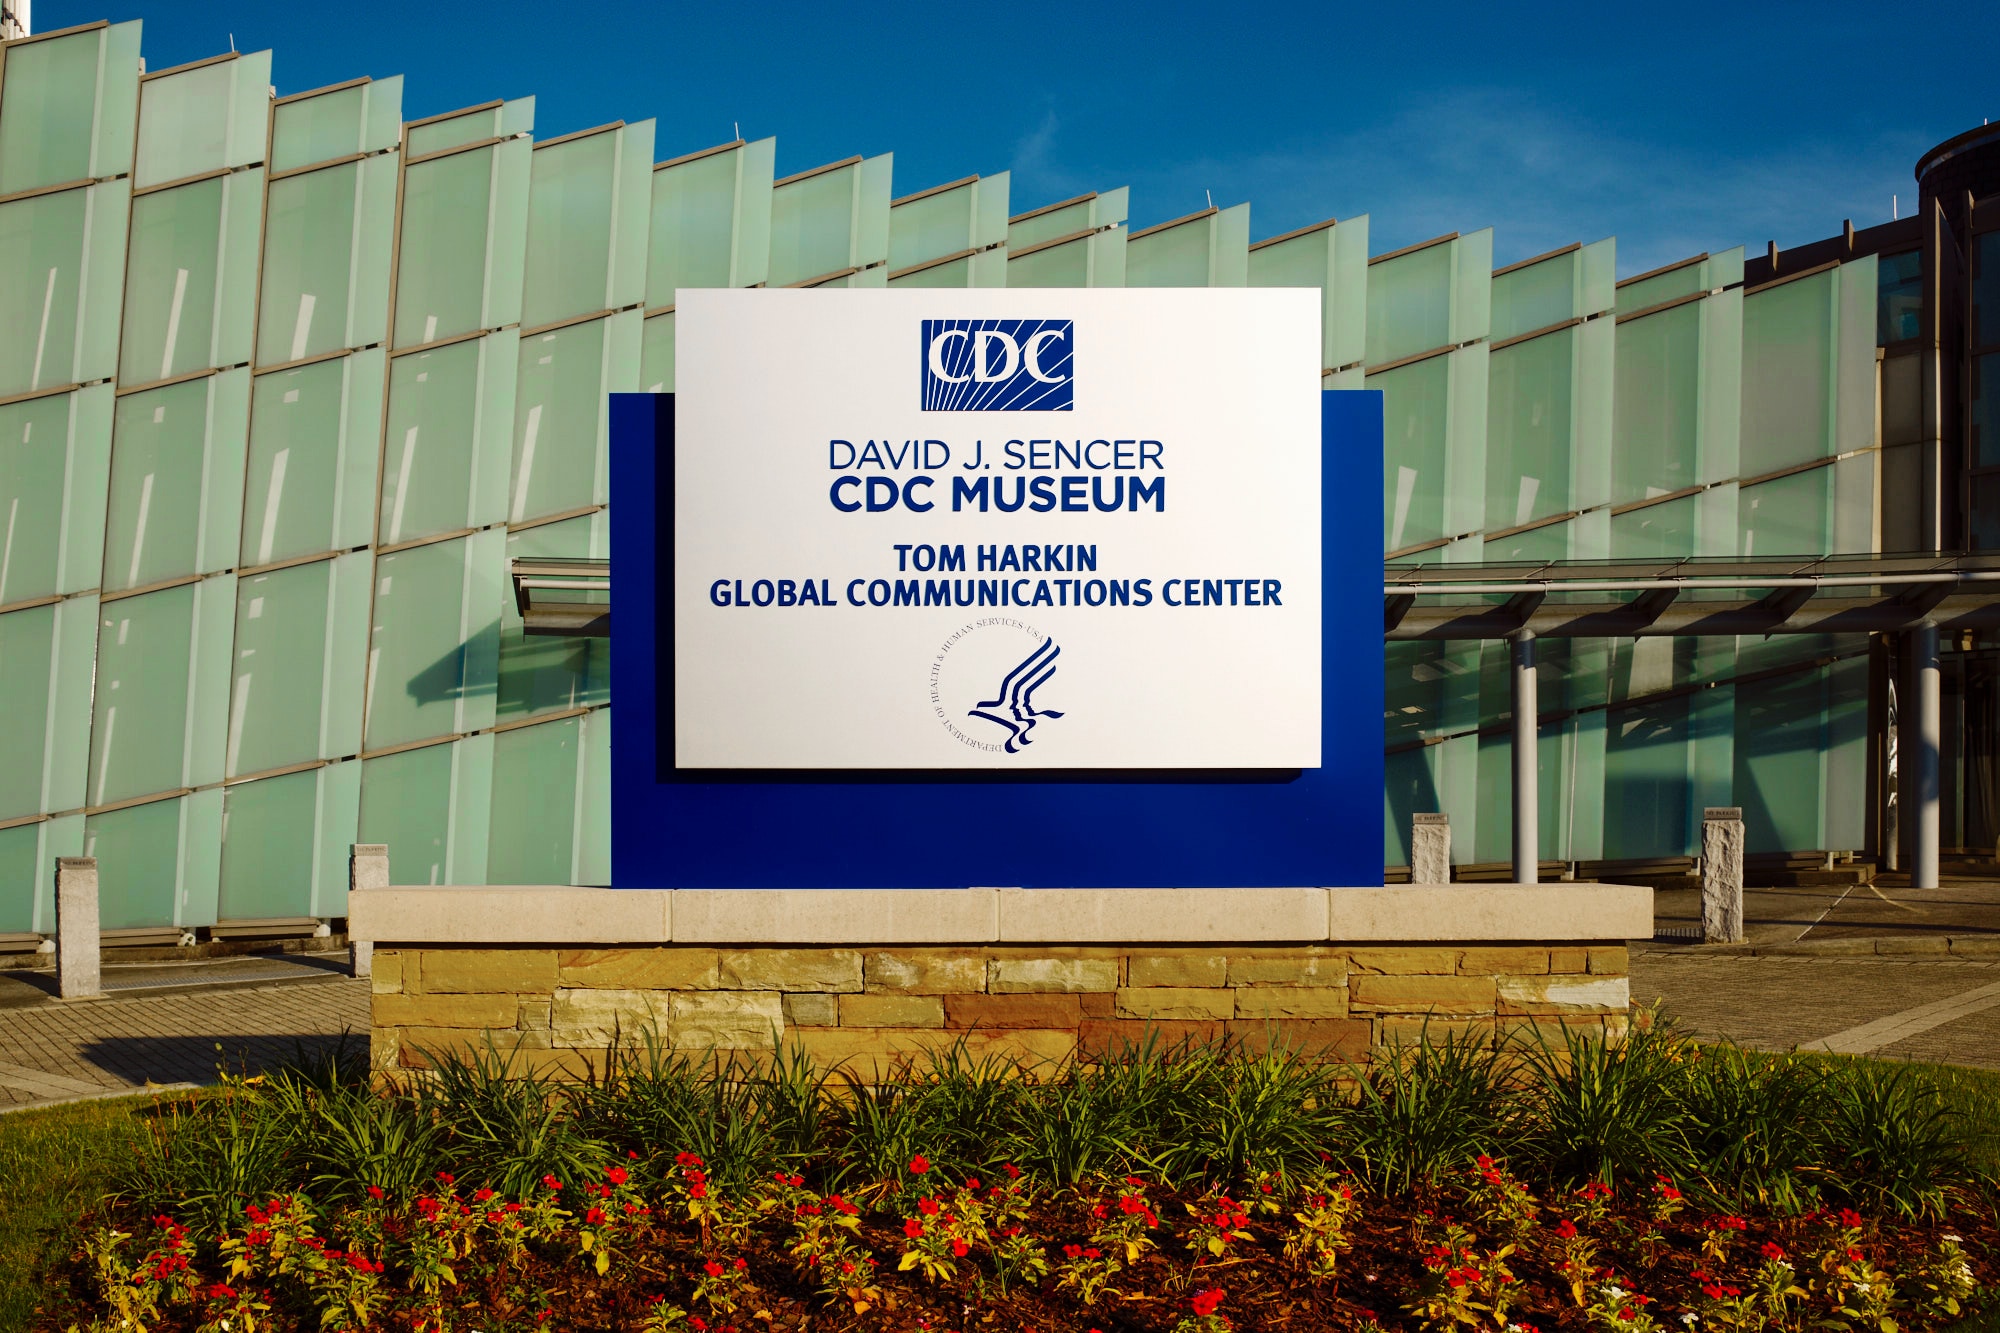 Plan your visit to the CDC Museum